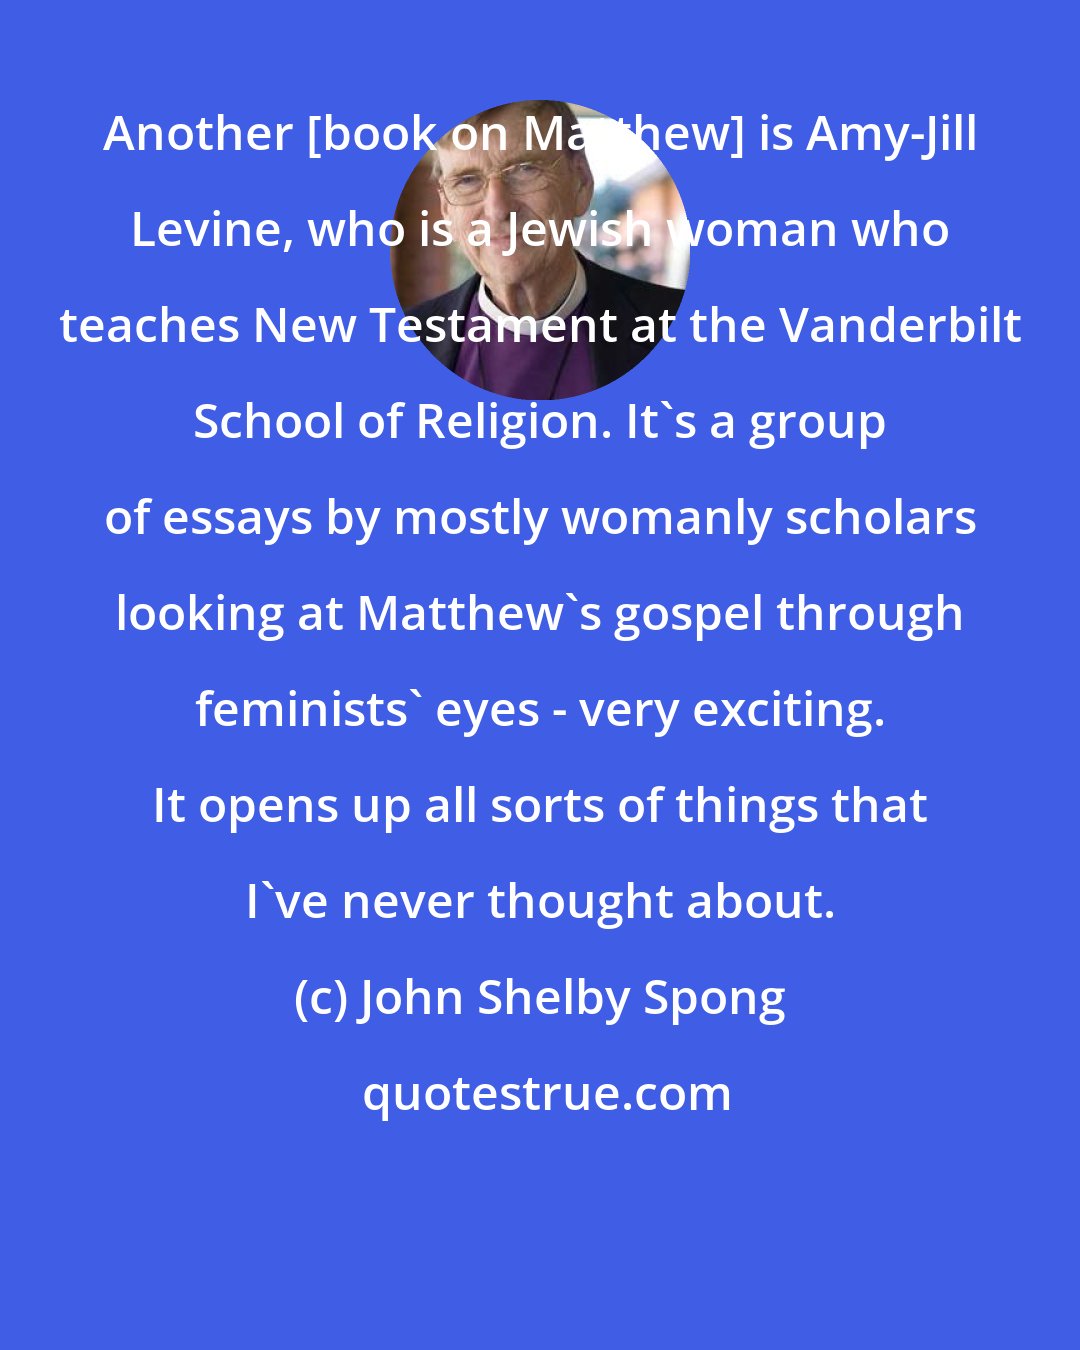 John Shelby Spong: Another [book on Matthew] is Amy-Jill Levine, who is a Jewish woman who teaches New Testament at the Vanderbilt School of Religion. It's a group of essays by mostly womanly scholars looking at Matthew's gospel through feminists' eyes - very exciting. It opens up all sorts of things that I've never thought about.